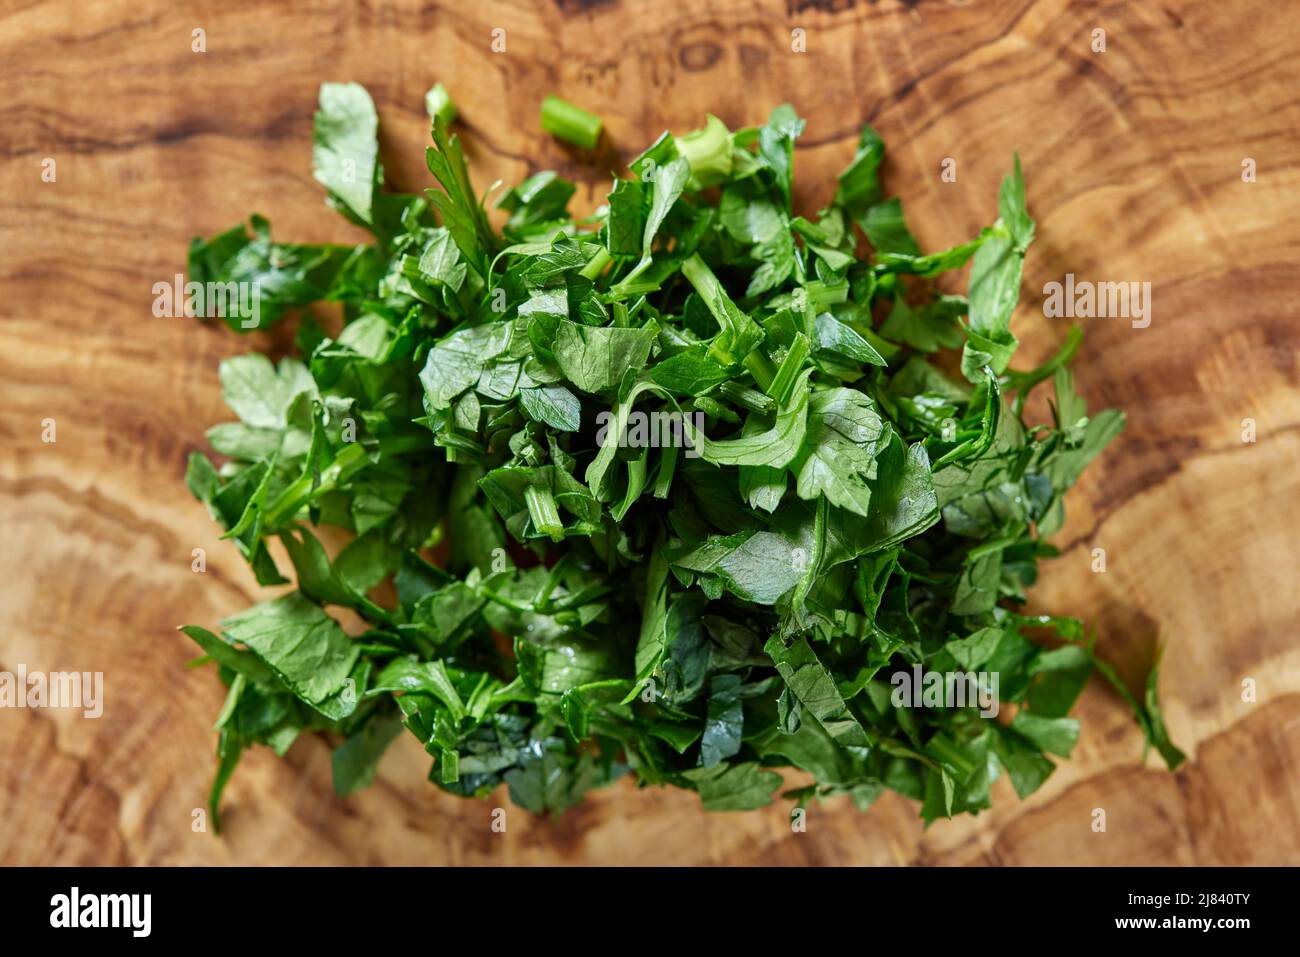 Chopped green parsley on a cutting board made from olive wood - close up view Stock Photo